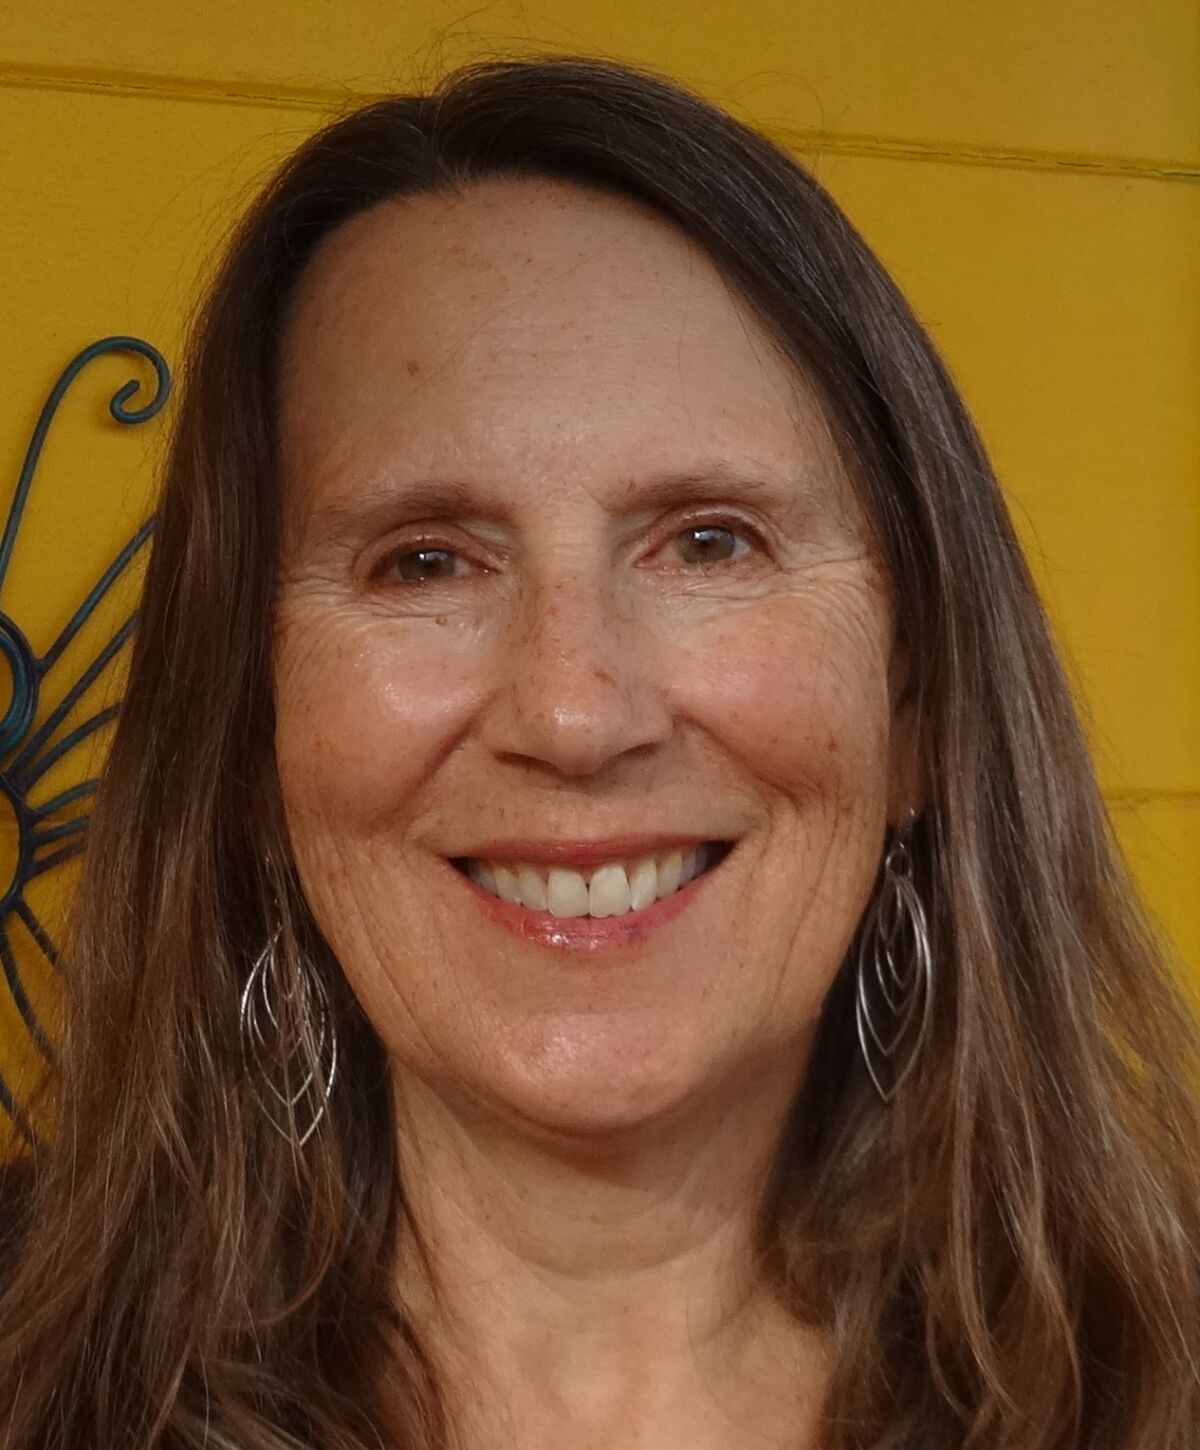 Karin Zirk is a writer and an environmentalist who has lived in Pacific Beach for about three decades.